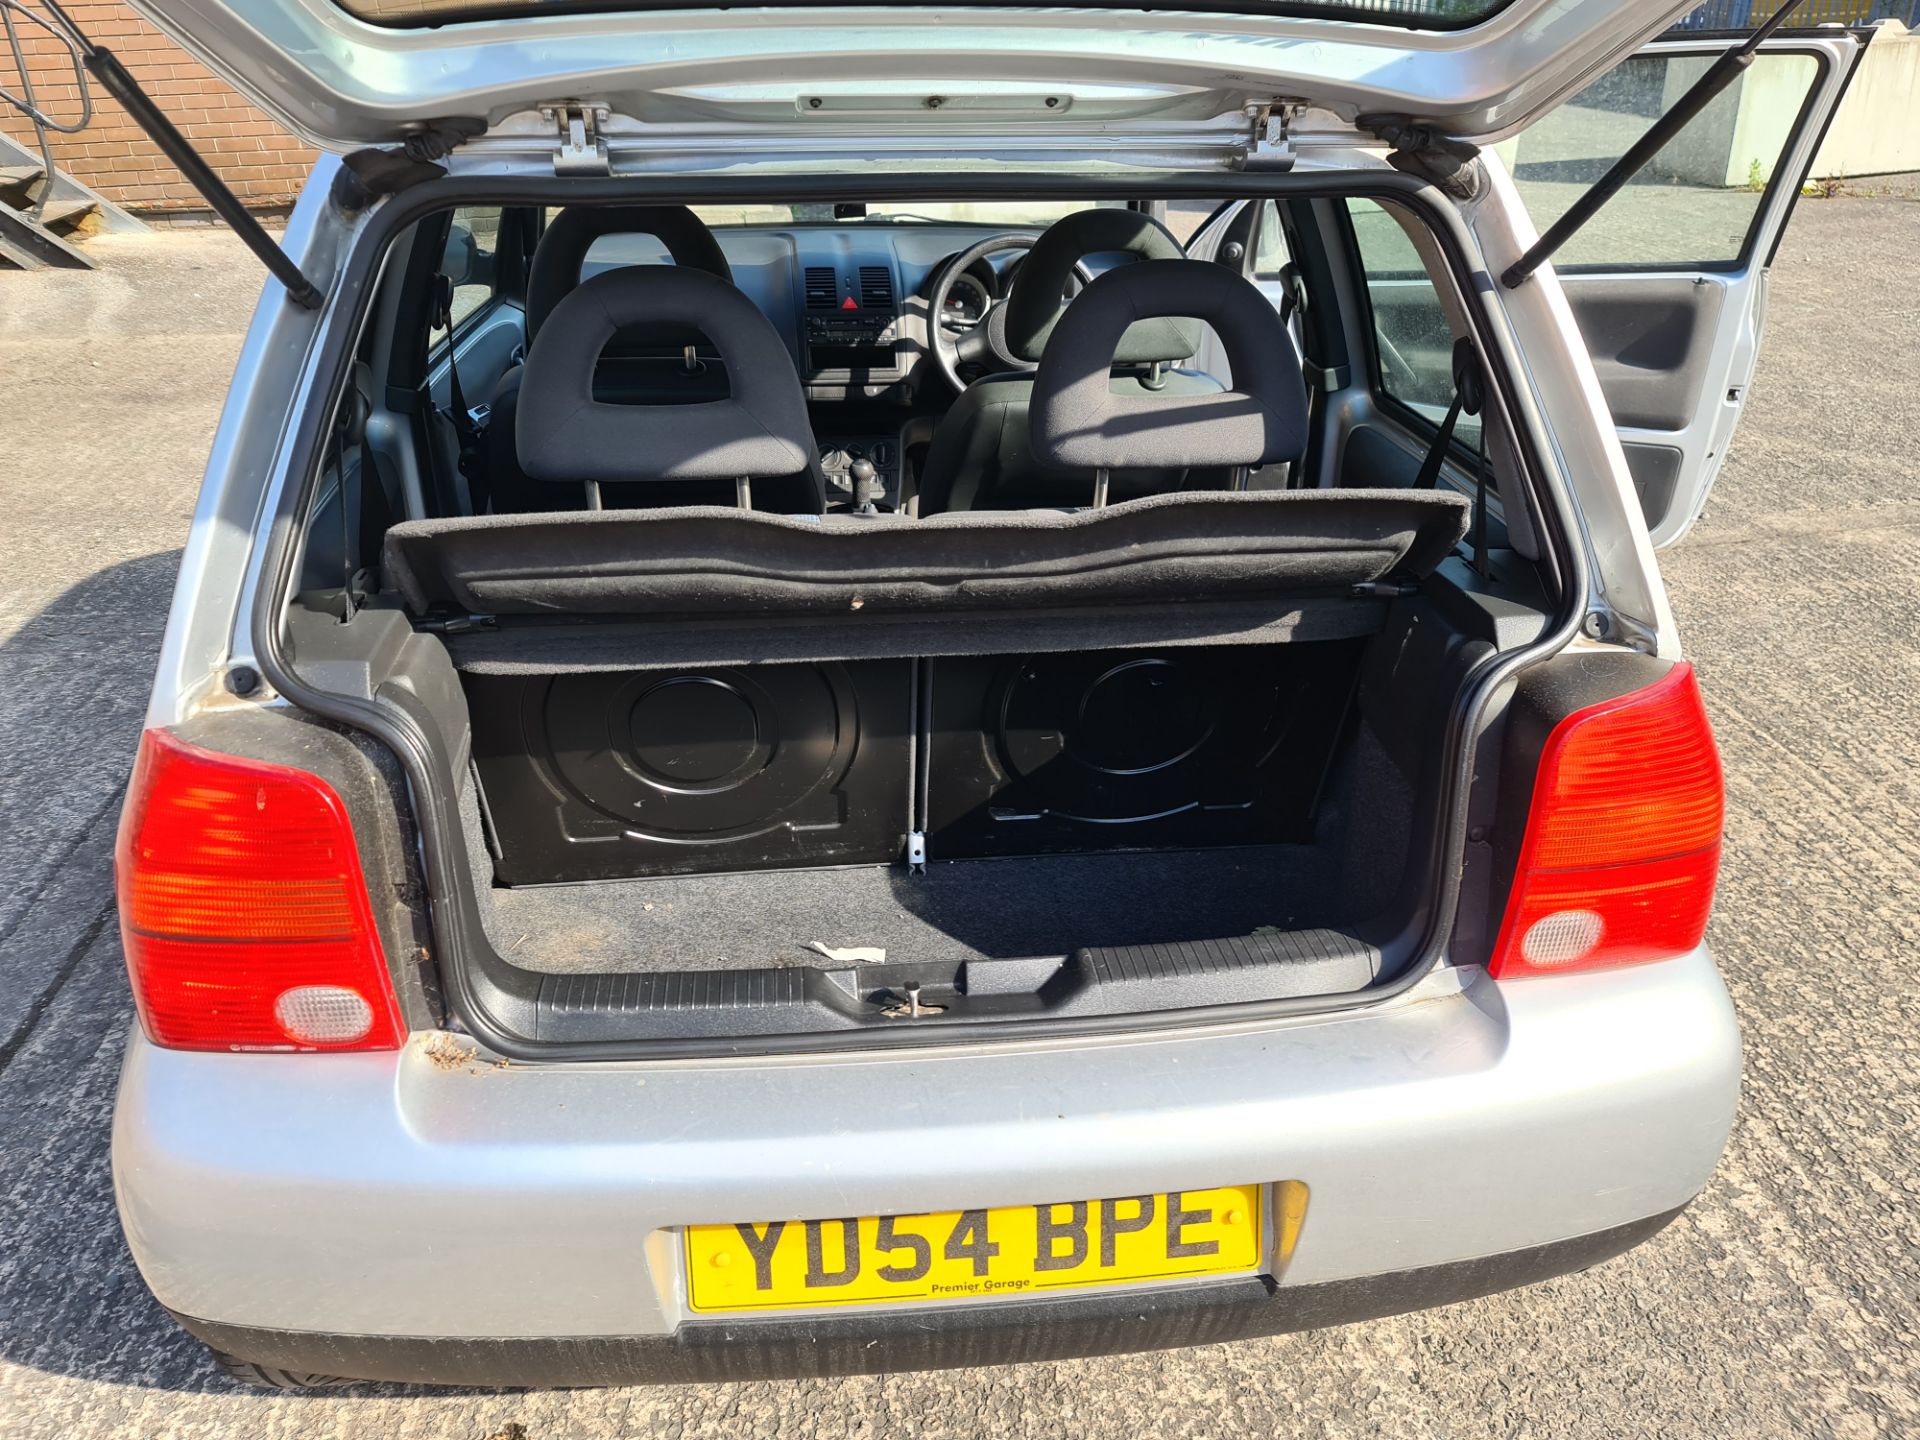 YD54 BPE Volkswagen Lupo E 3 door hatchback car, 5 speed manual gearbox, 999cc petrol engine. Colou - Image 16 of 40